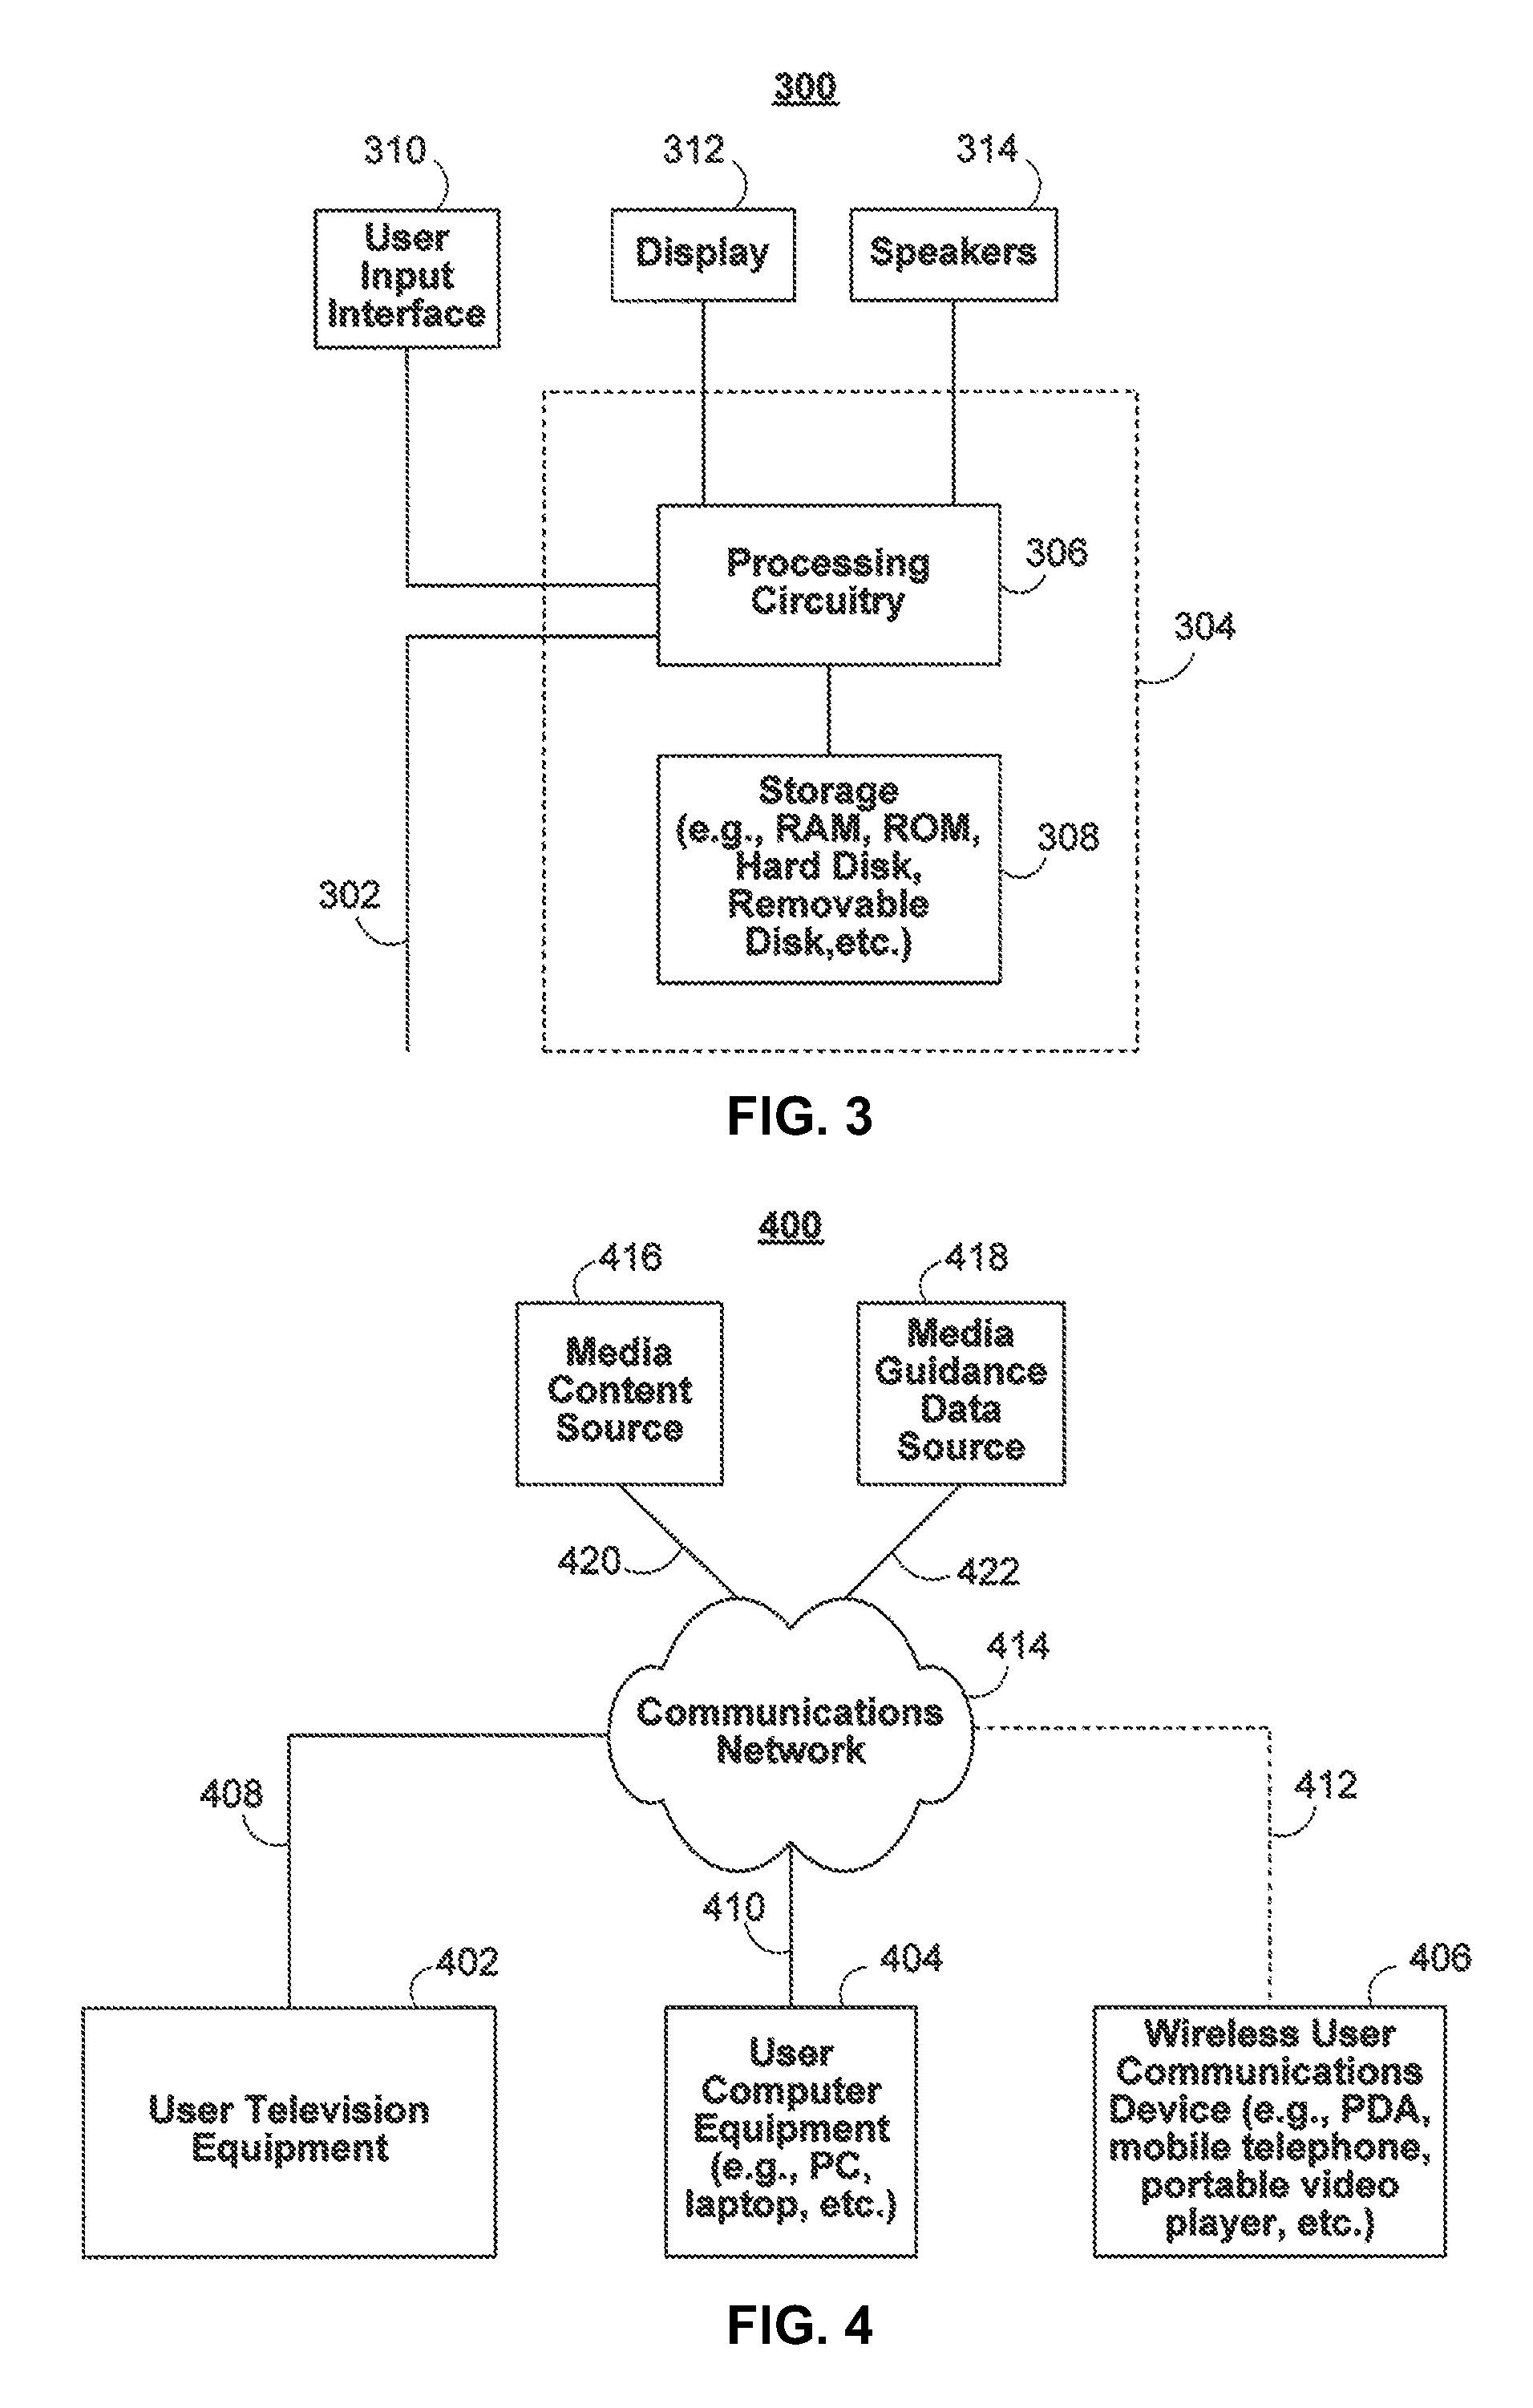 Systems and methods for detecting unauthorized use of a user equipment device